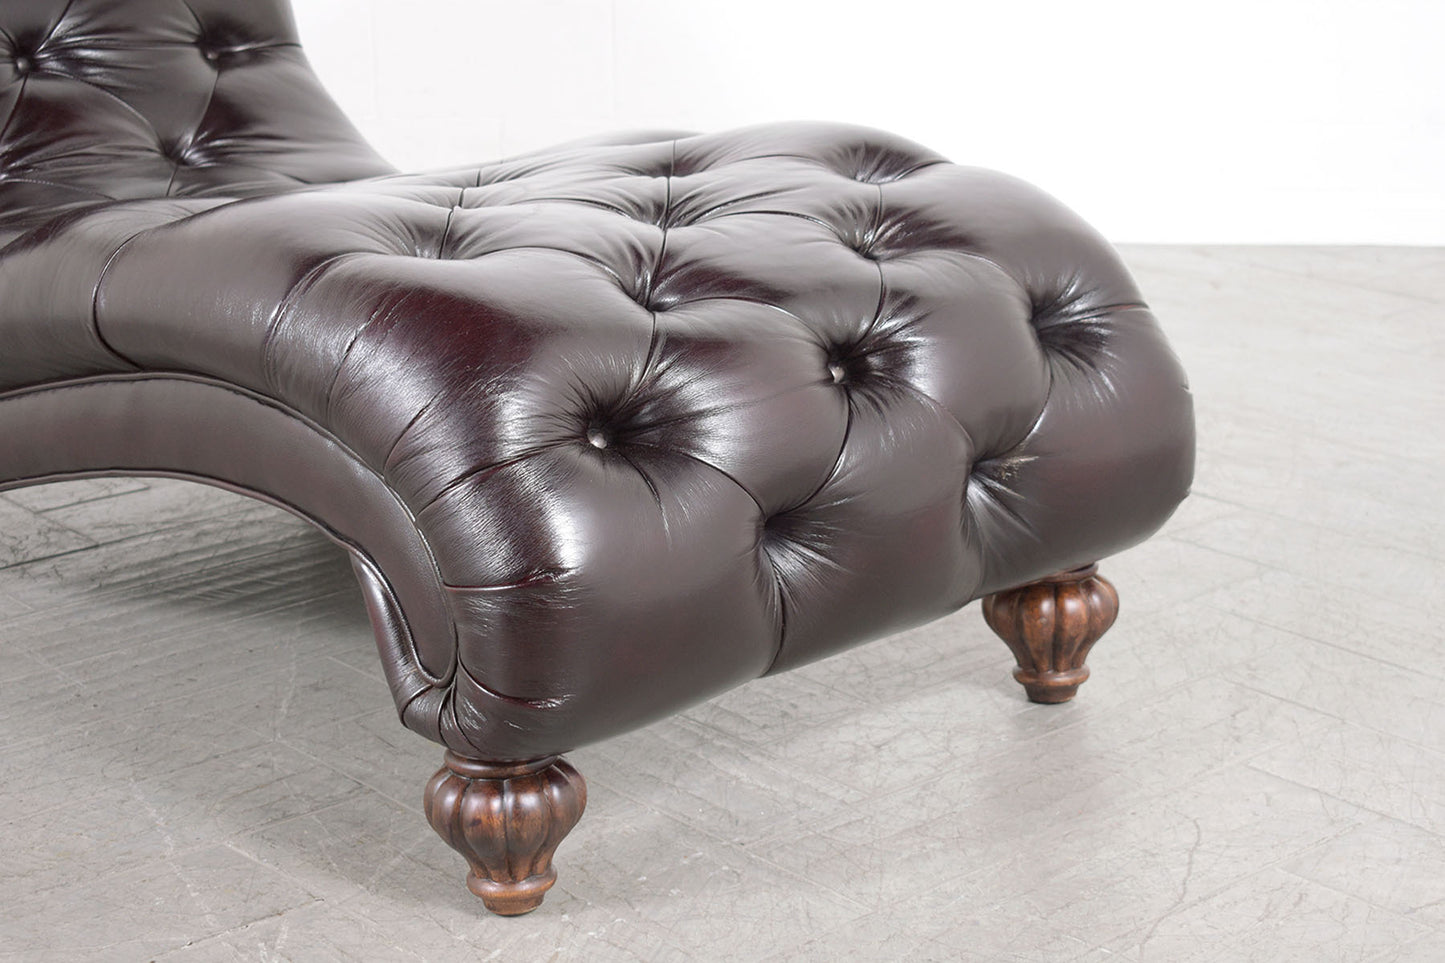 Classic Elegance: 1980s Chesterfield Chaise Lounge in Dual-Tone Leather